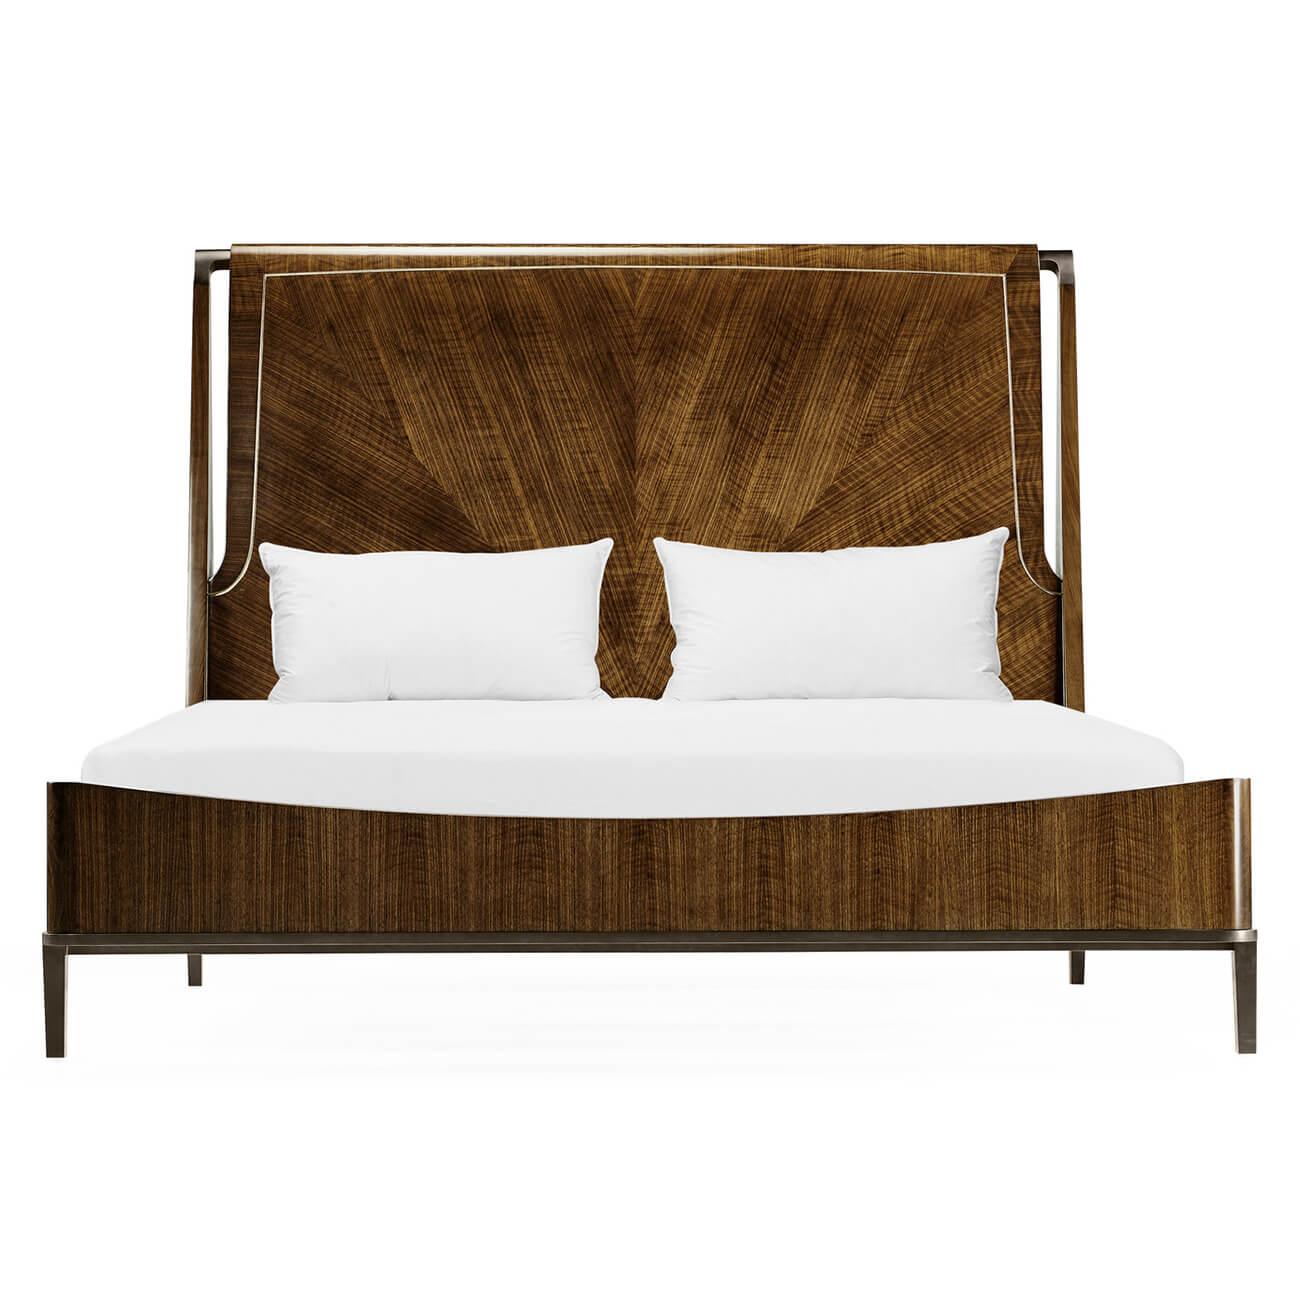 A midcentury style quartered walnut king-size bed with an upholstered headboard and antique brass hardware and feet.

Dimensions: 82 1/4